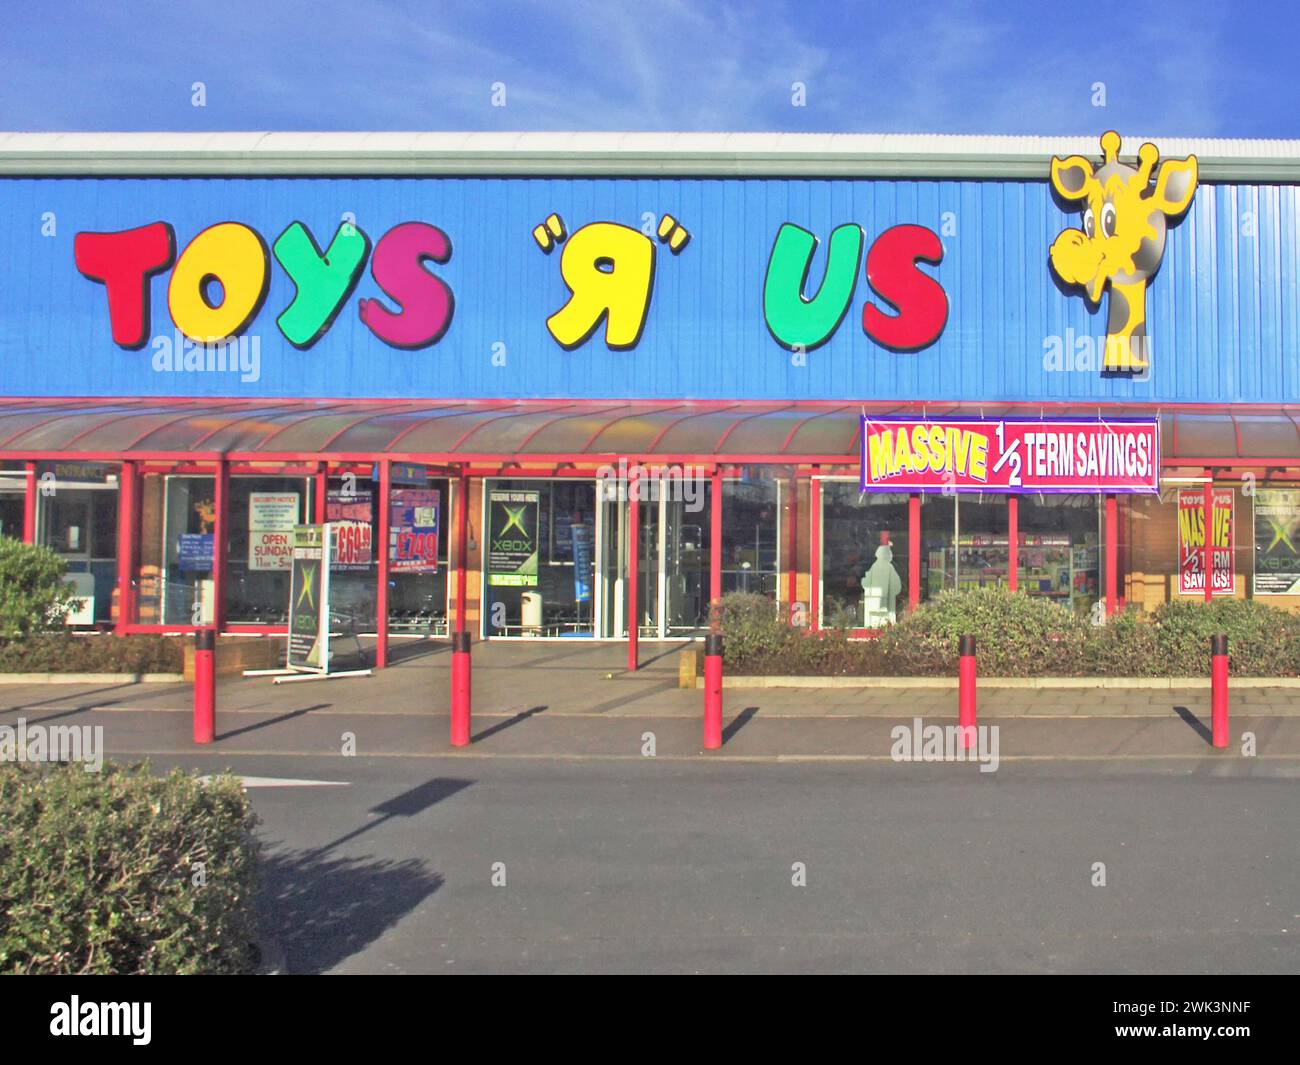 Toys R Us a retail toy business store & close up of logo brand sign on 1900s historical archive shop sign featuring Geoffrey Giraffe the official mascot later to be excluded from UK stores as shown in Alamy image ref E54G48 & C3X2JX, ( The company filed for bankruptcy in 2017 and 2018, closing all UK stores) Note that date taken is very approximate Stock Photo